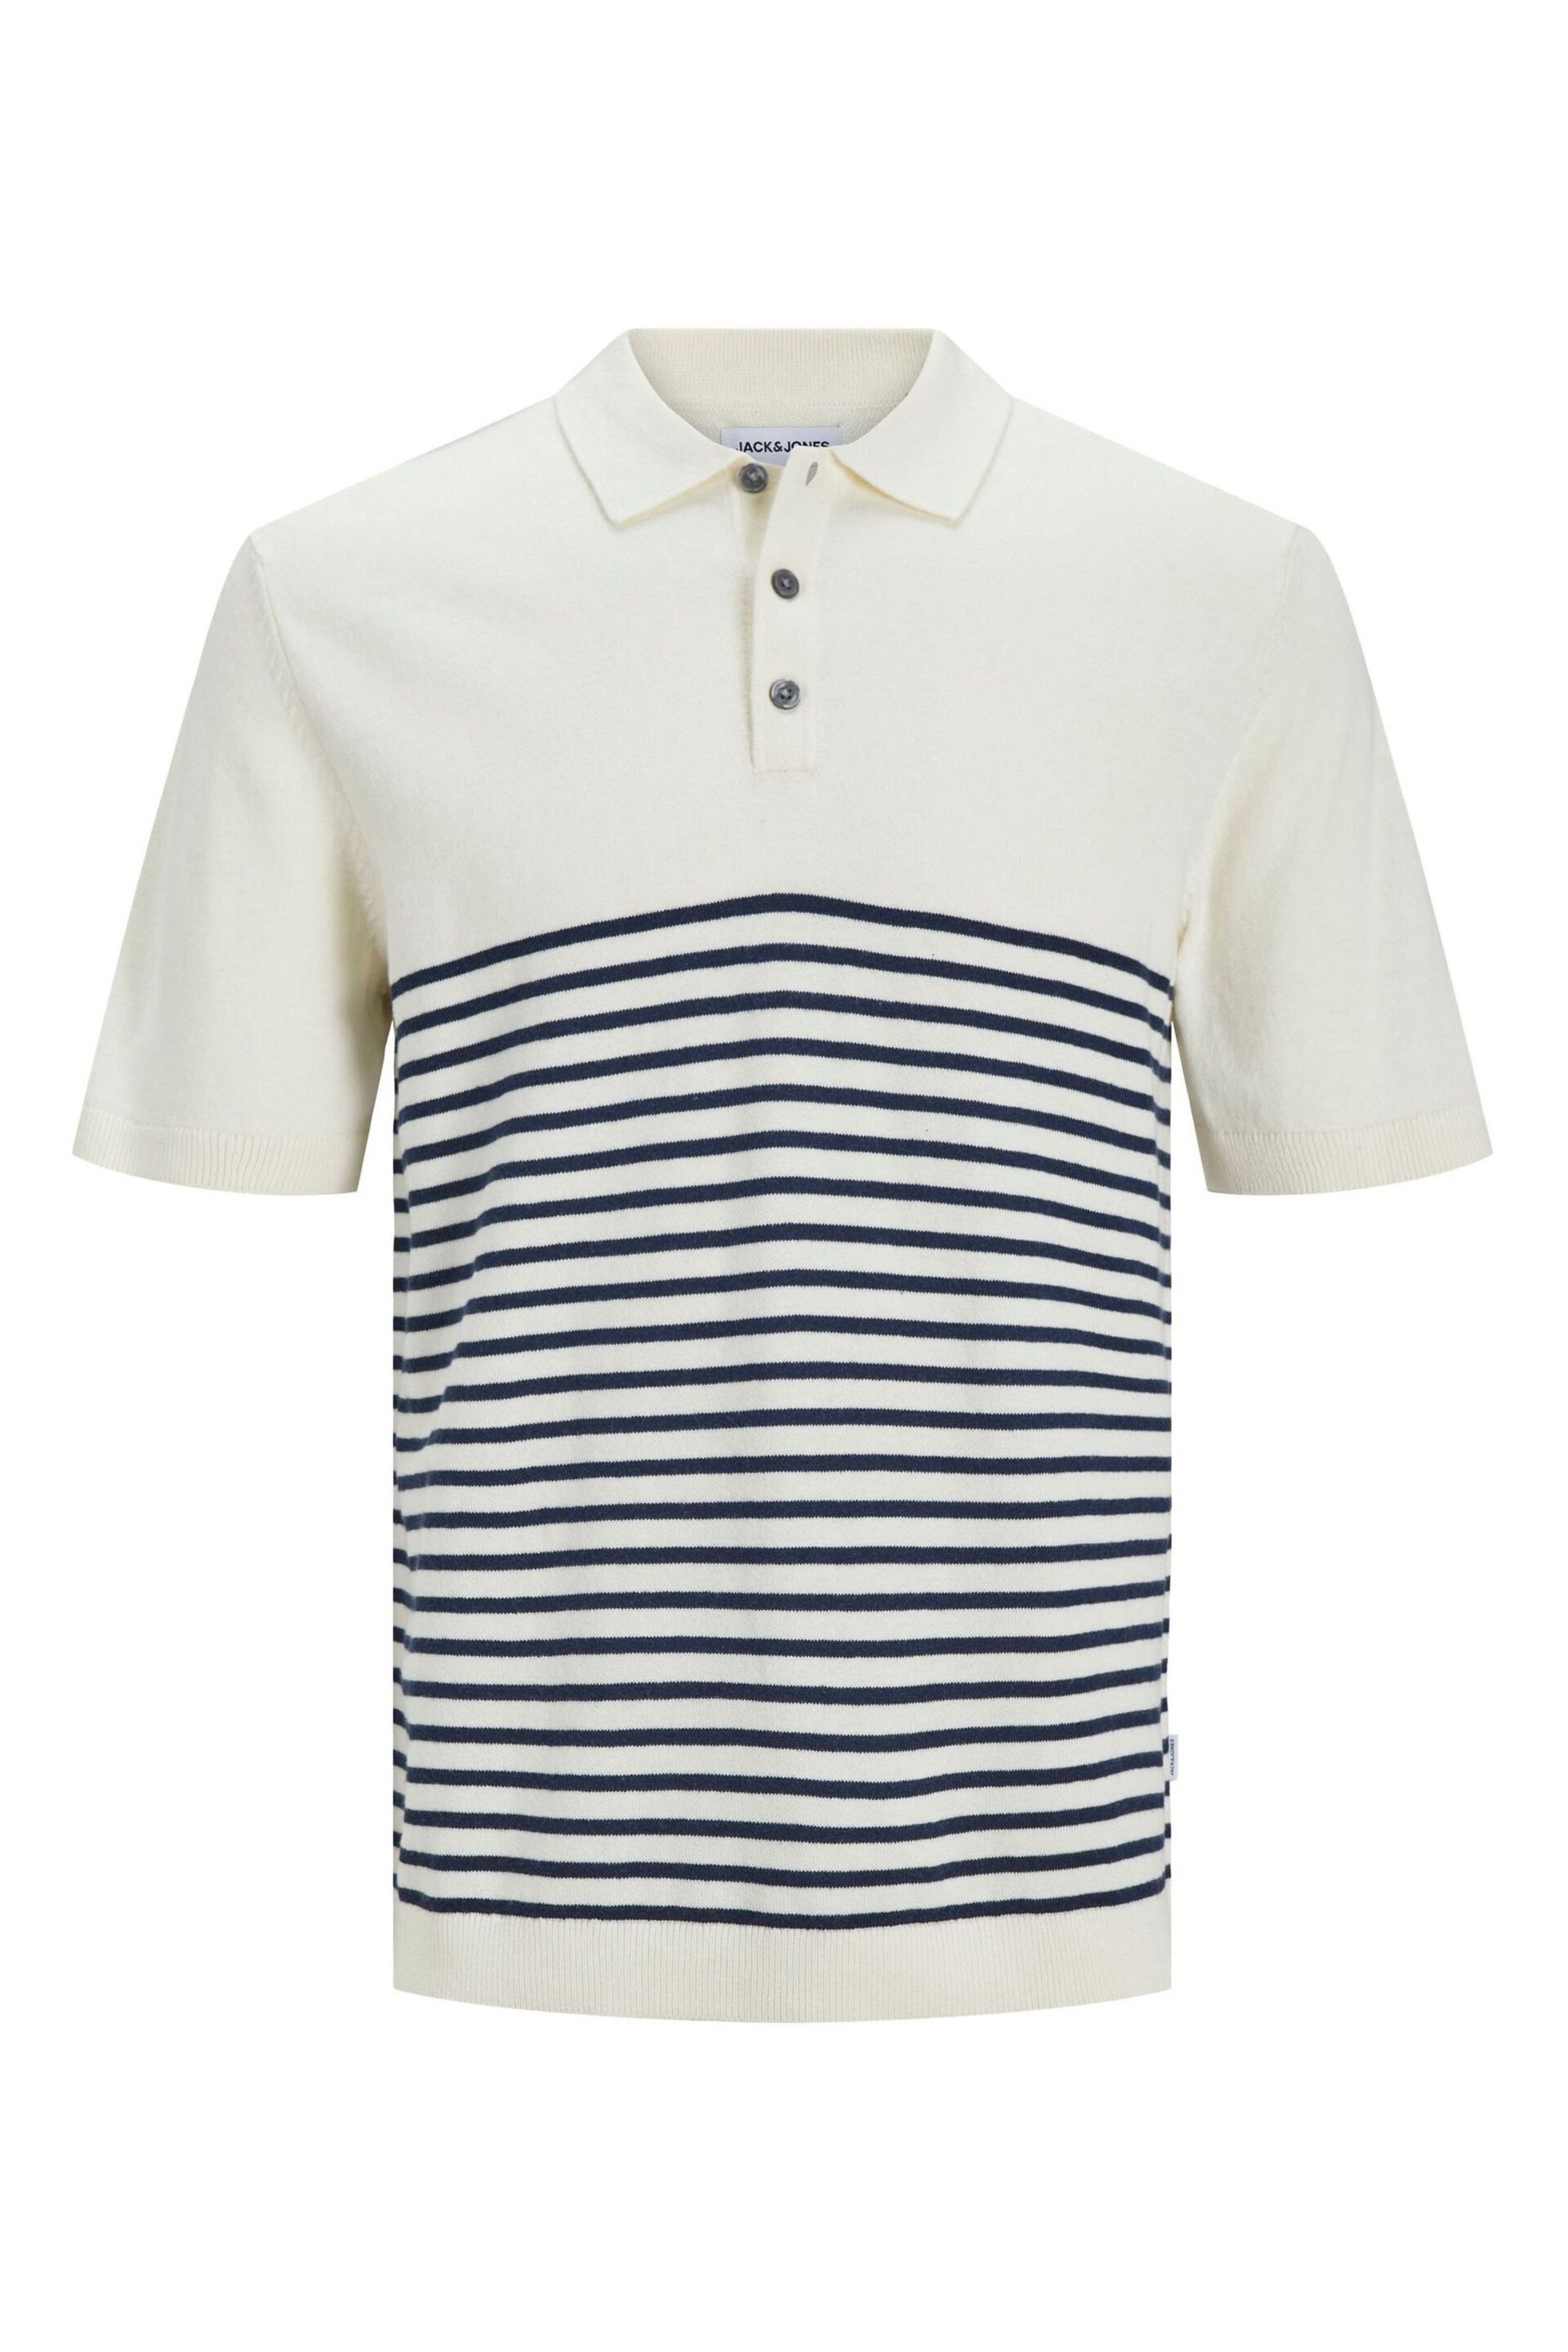 JACK & JONES White Knitted Polo Top - Image 6 of 6